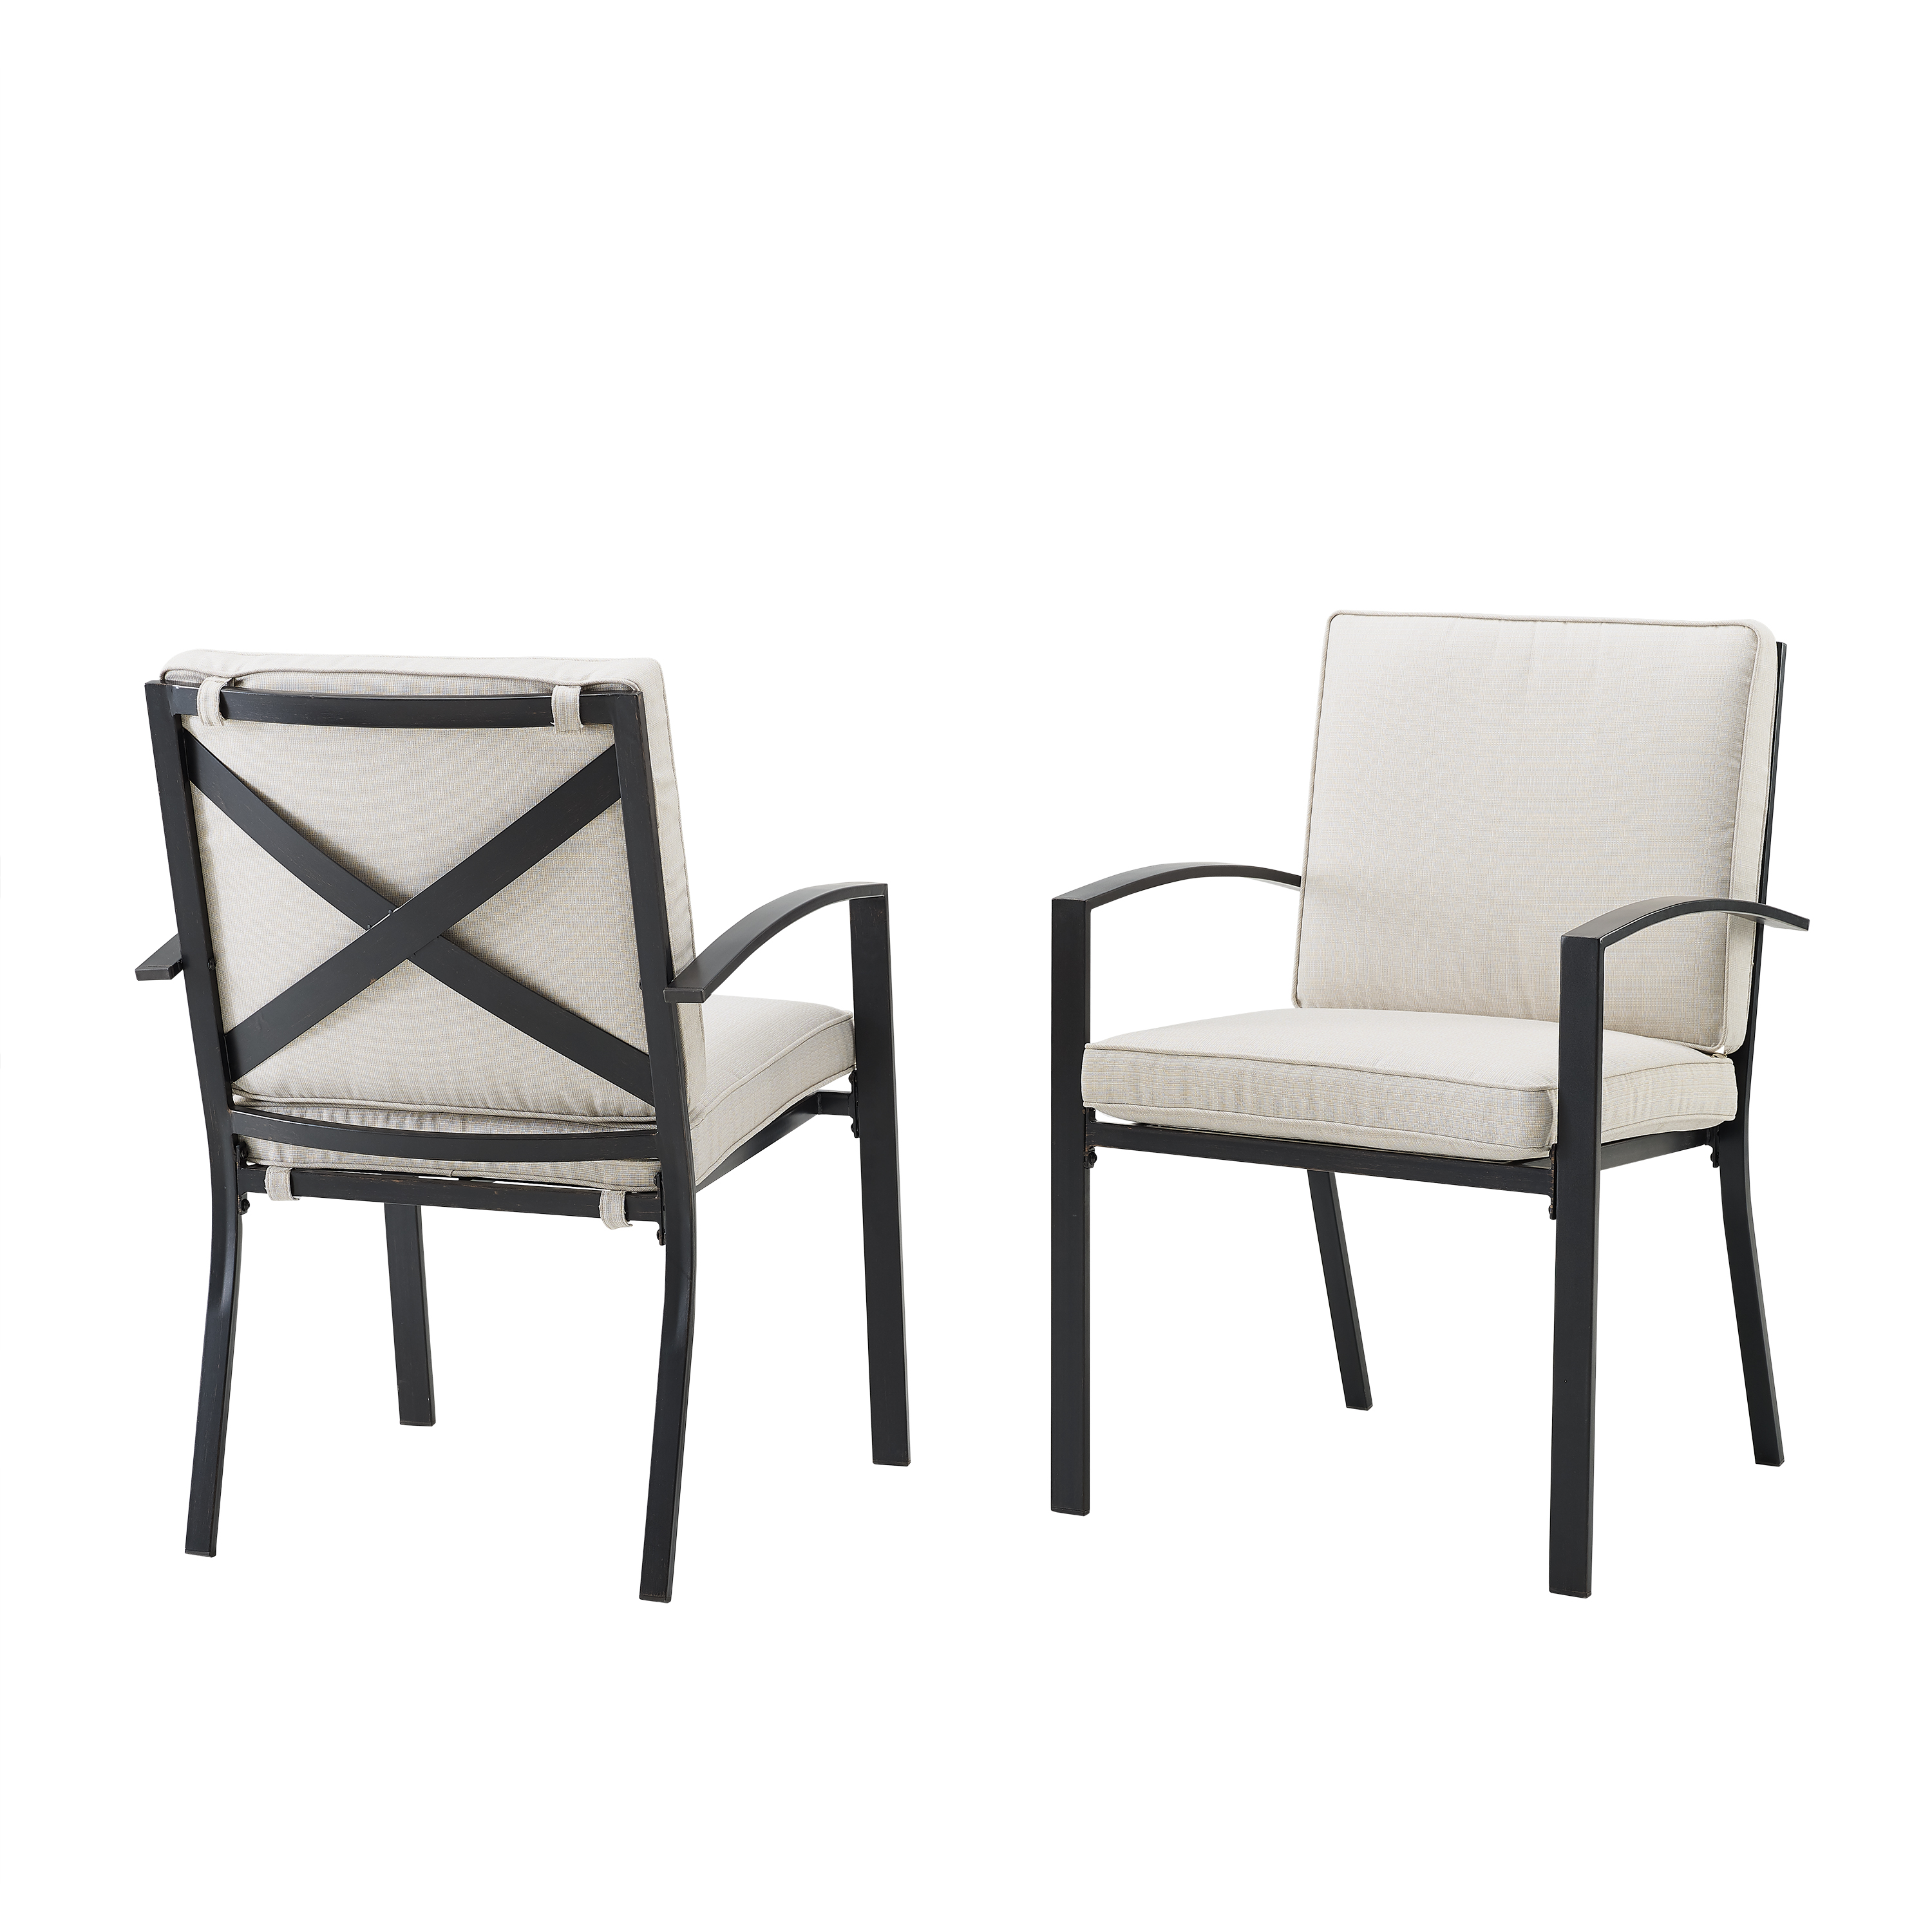 Crosley Furniture Kaplan Fabric Outdoor Dining Chair Set in Oatmeal (Set of 2) - image 4 of 12